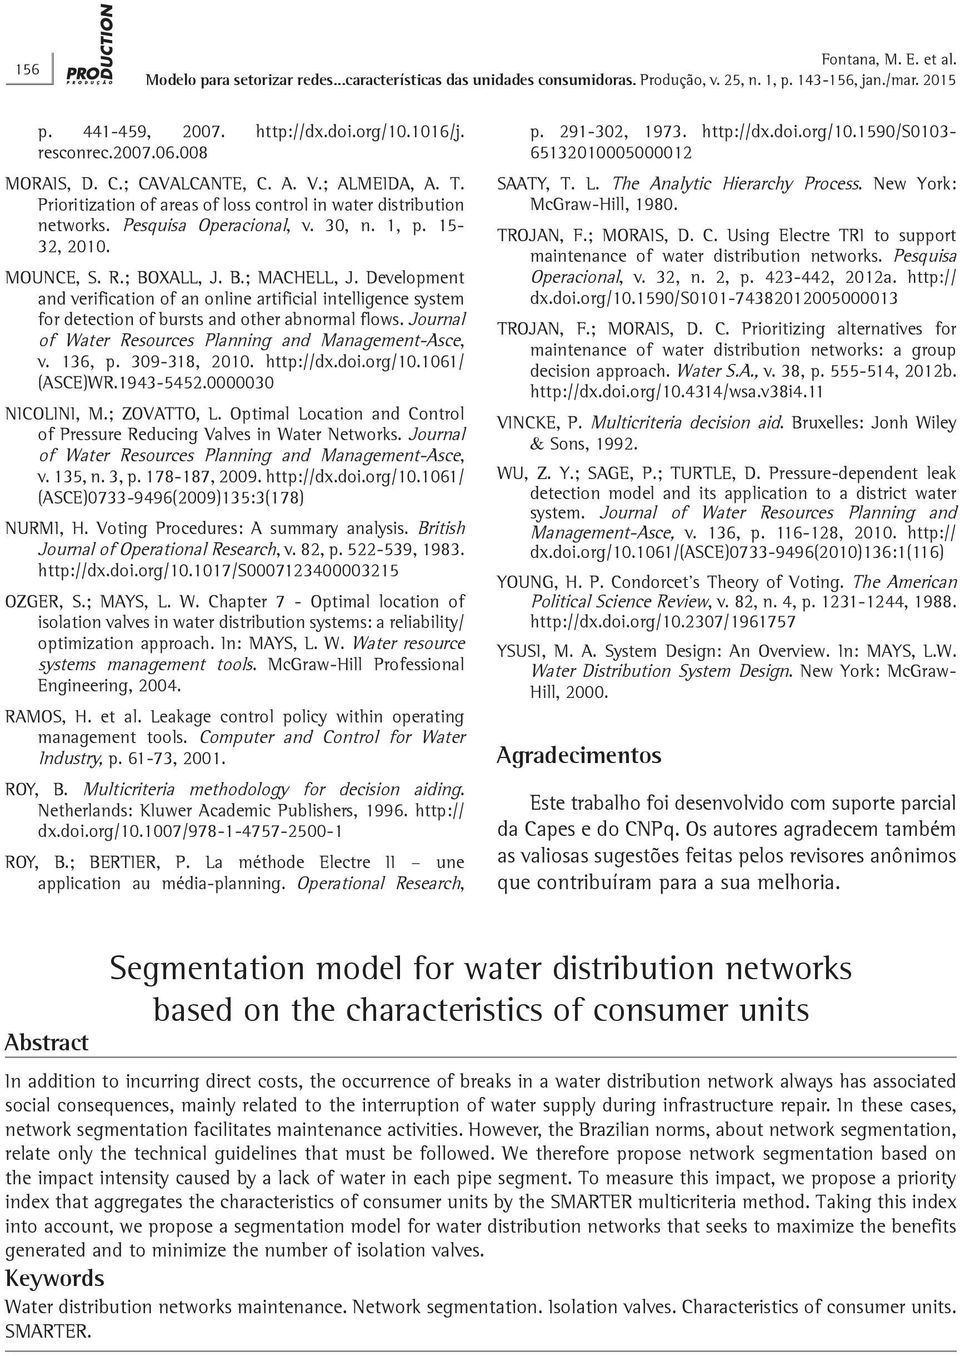 Development and verification of an online artificial intelligence system for detection of bursts and other abnormal flows. Journal of Water Resources Planning and Management-Asce, v. 136, p.